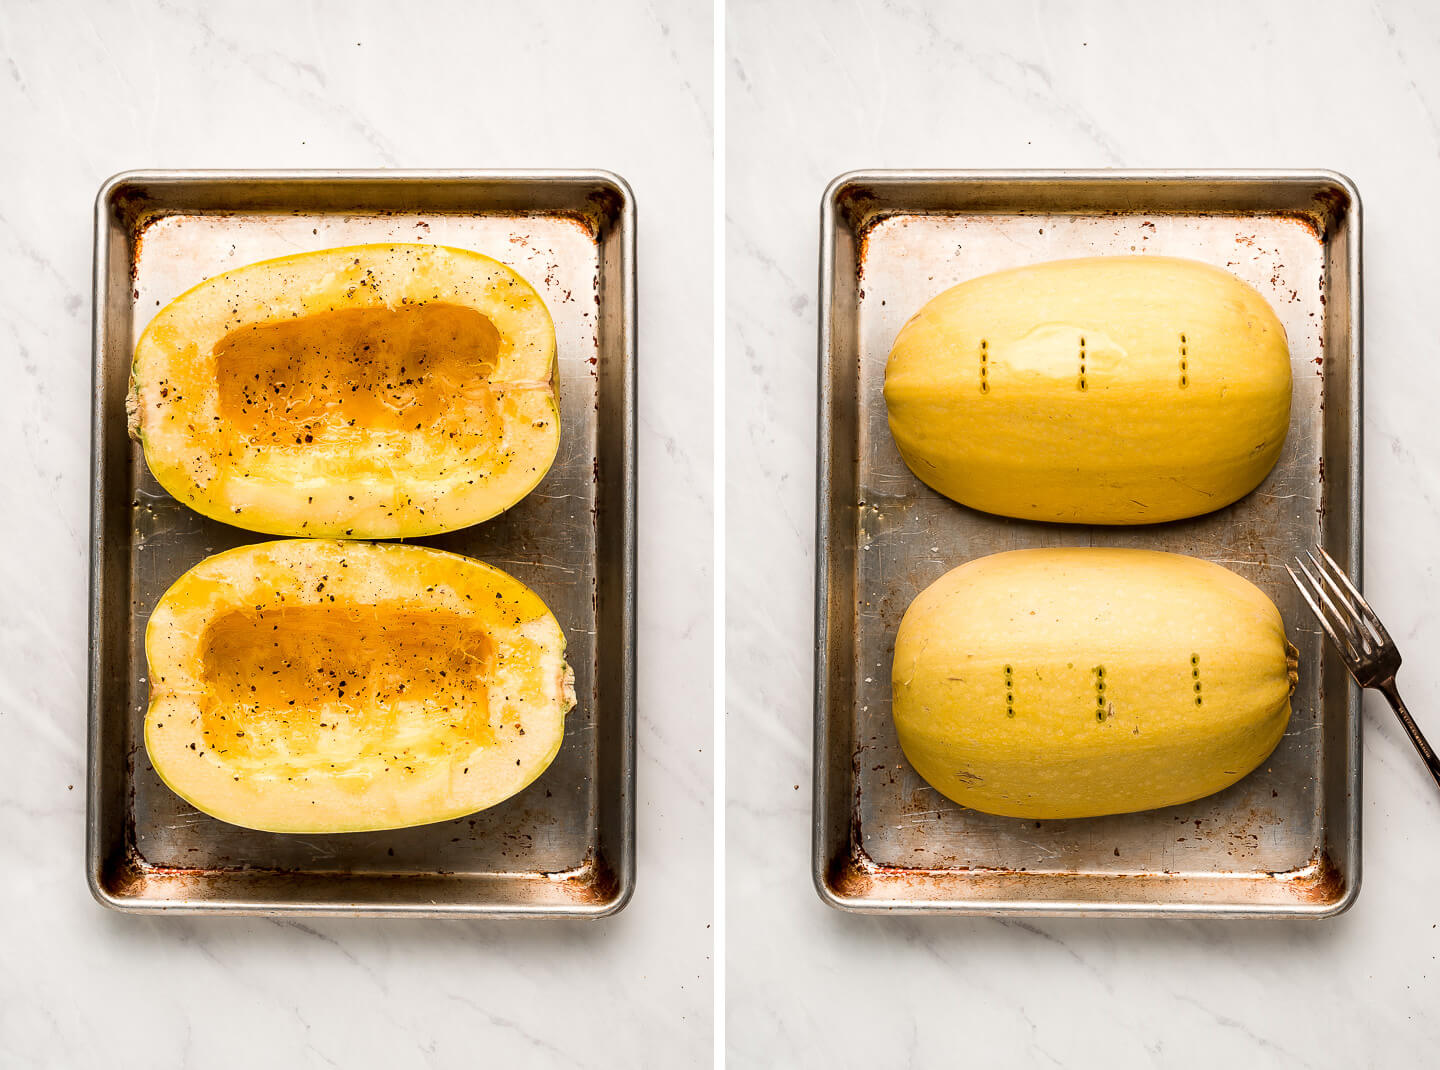 Diptych- Spaghetti squash cut in half with oil and salt and pepper; upside down with fork holes.